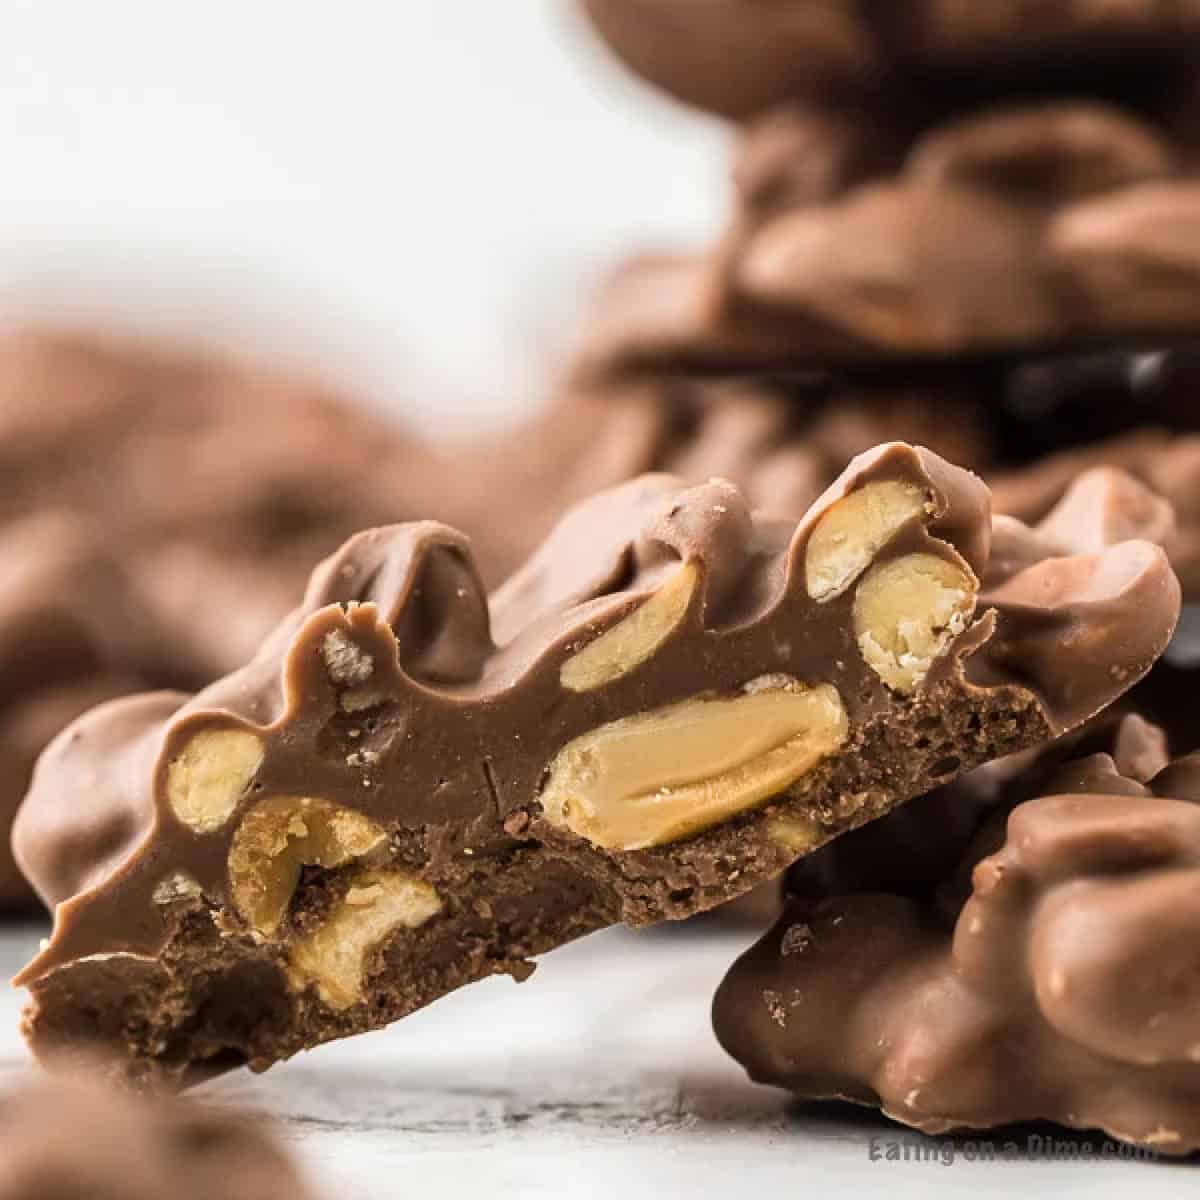 Close-up of a stack of Crockpot Peanut Clusters. The front cluster is broken in half, revealing whole peanuts embedded in rich, creamy chocolate. The background shows additional clusters, slightly blurred, emphasizing texture and detail in the treats.